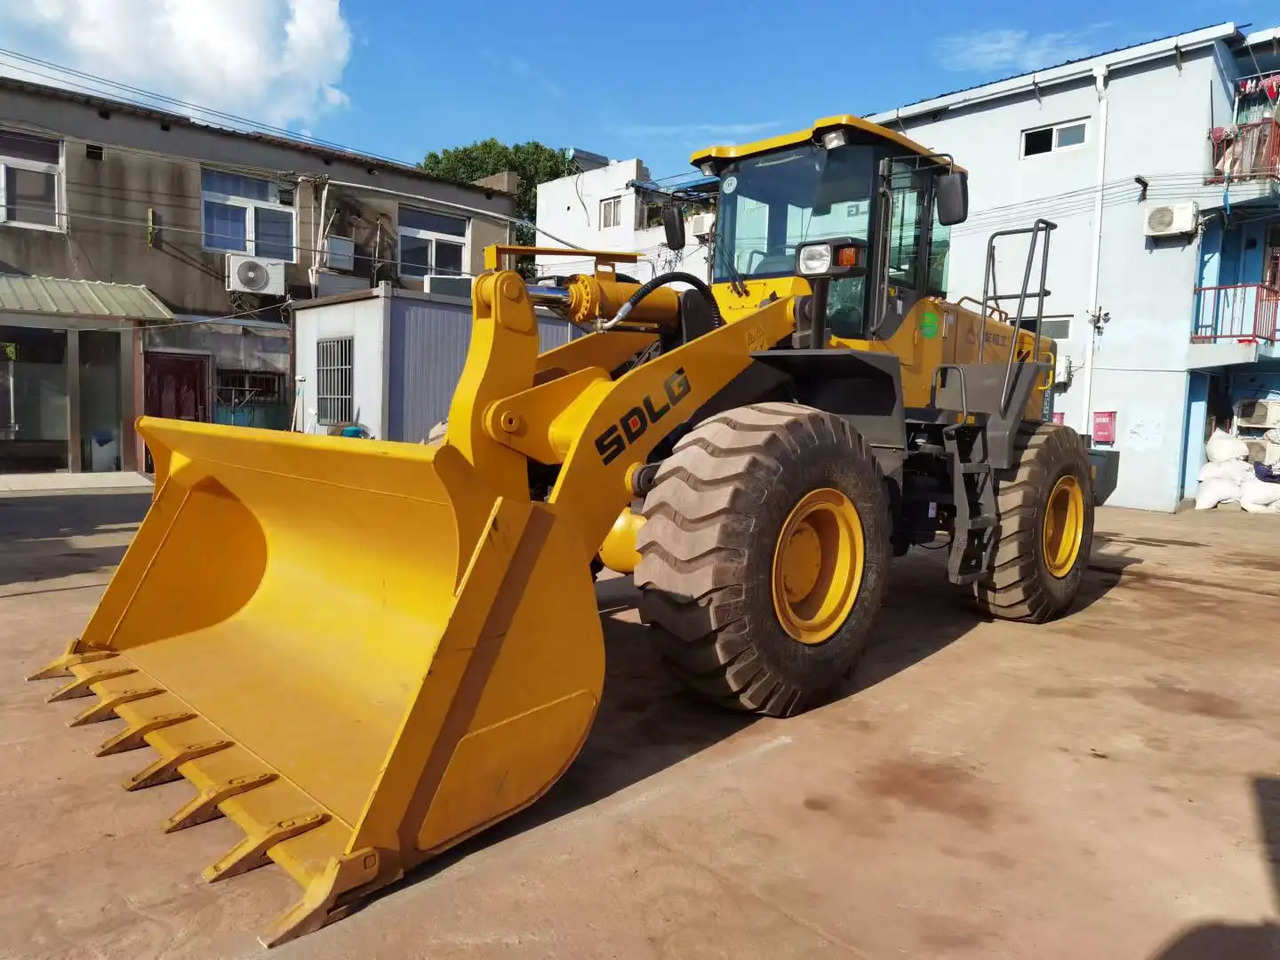 Wiellader Used SDLlG Wheel loader 936 956 on sale with good running condition